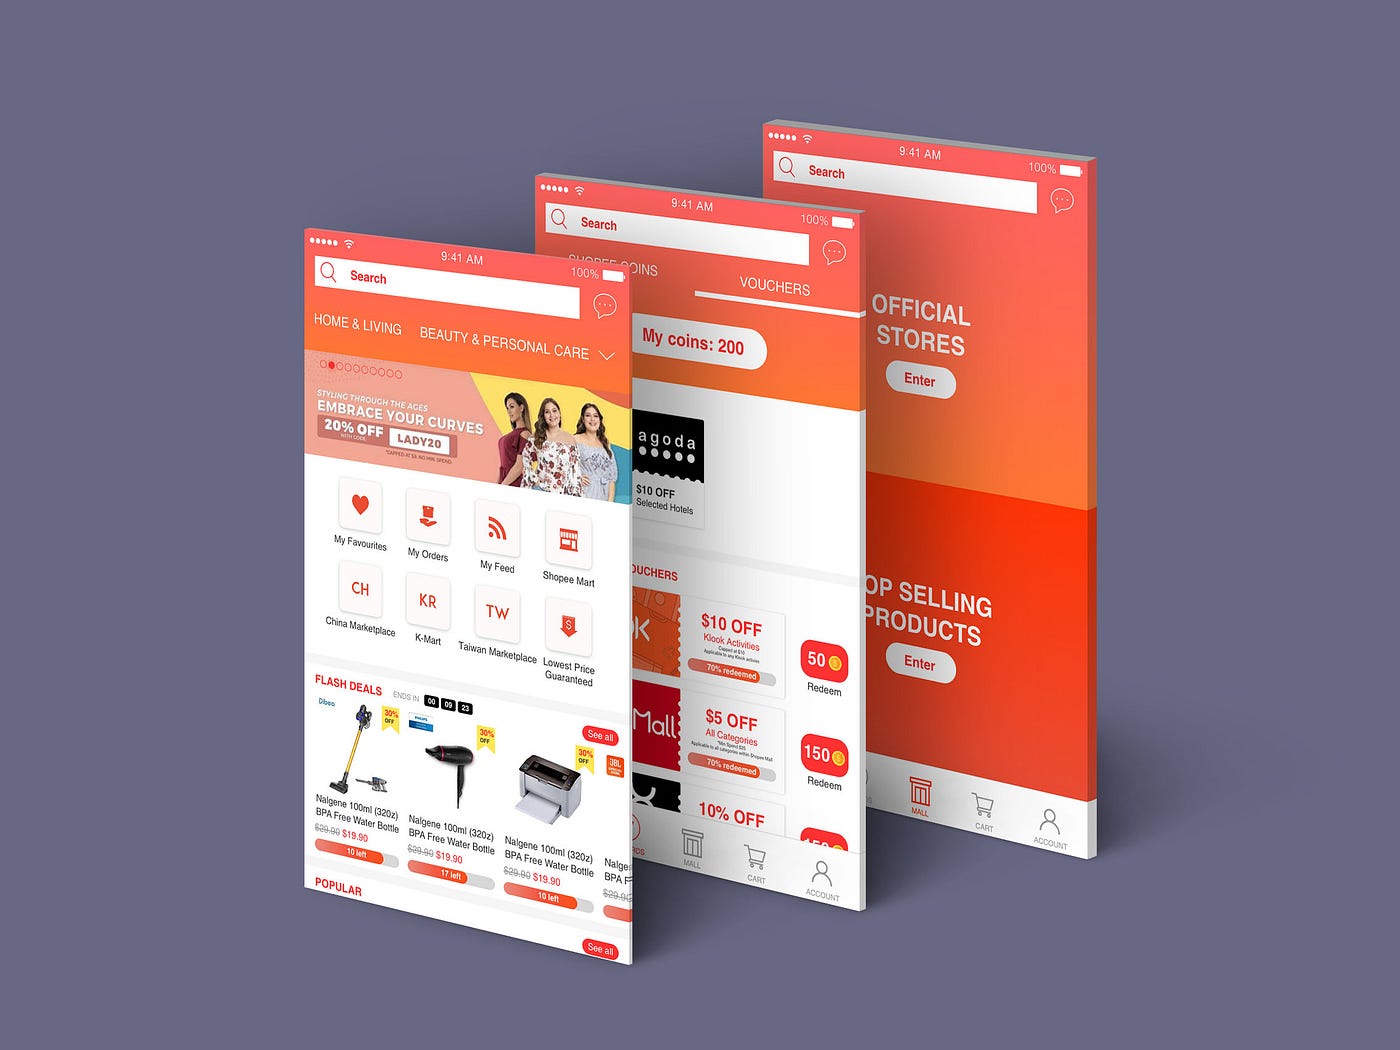 A UX case study on Shopee (and my redesign of it), by Jasmine Tay